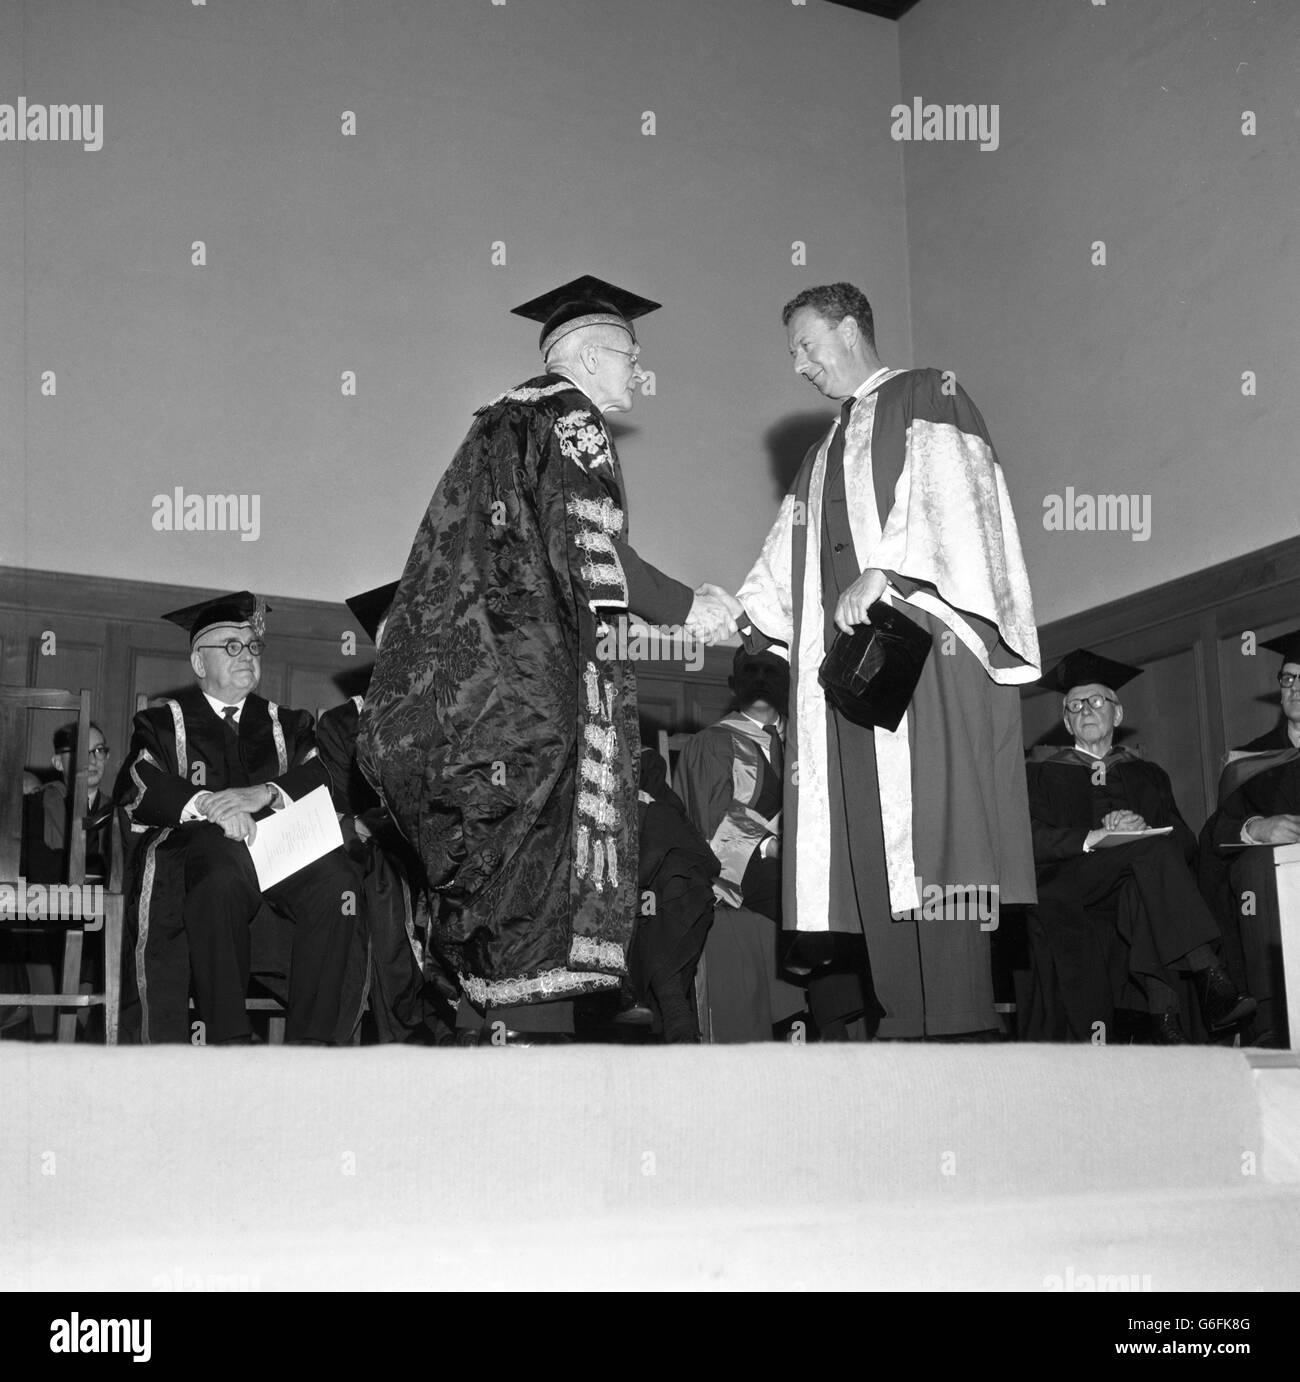 Chancellor Lord Adrian shakes hands with composer Benjamin Britten, who received an honorary Doctor of Music degree at the University of Leicester. Britten is the director of the English Opera Group and Artistic Director of the Aldeburgh Festival. Stock Photo